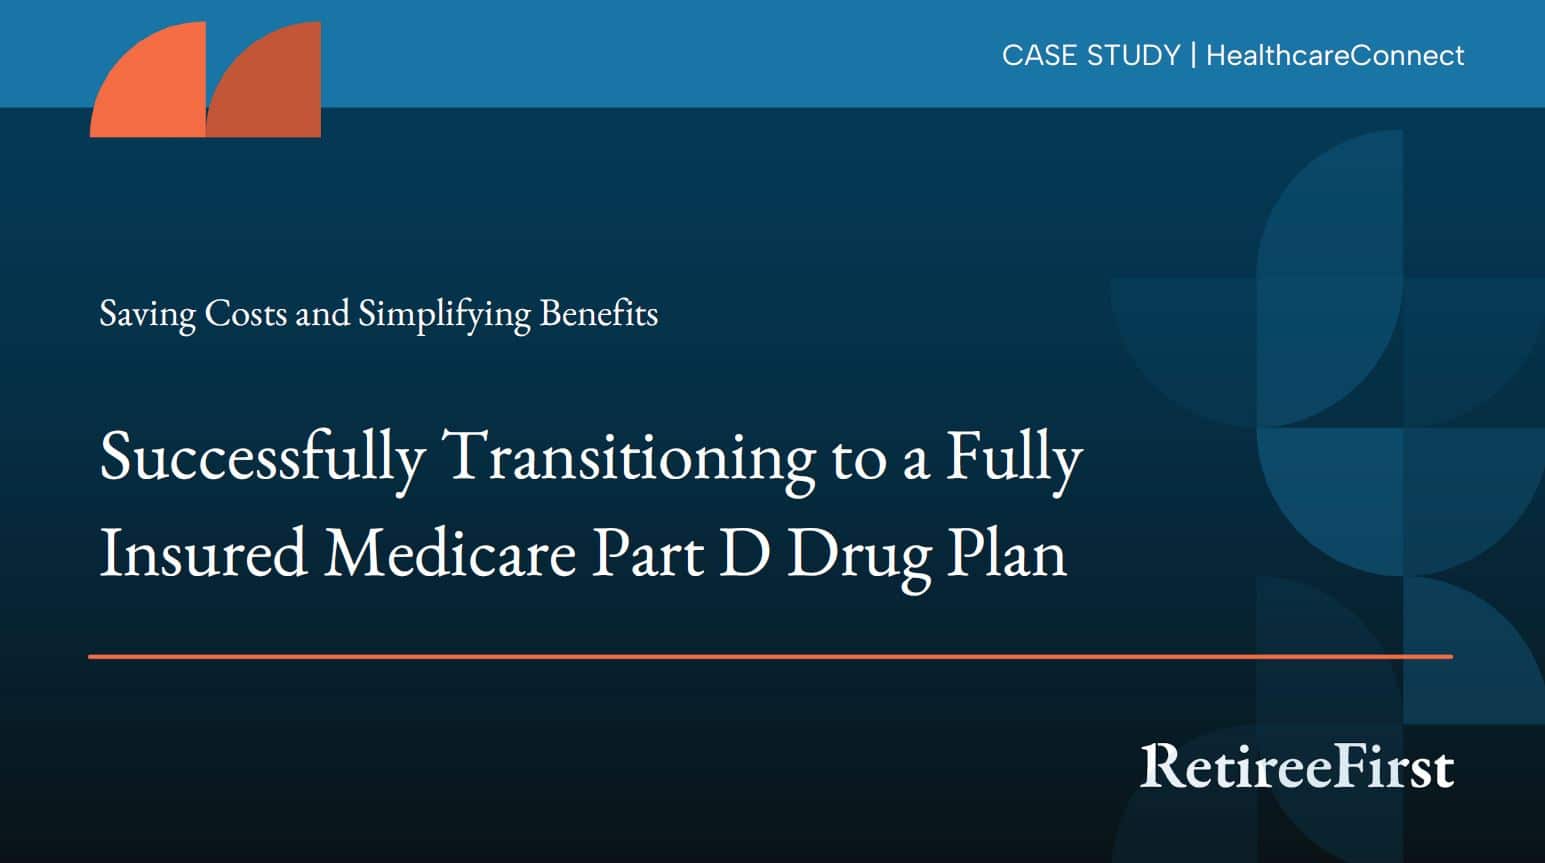 Successfully Transitioning to a Fully Insured Medicare Part D Drug Plan case study banner